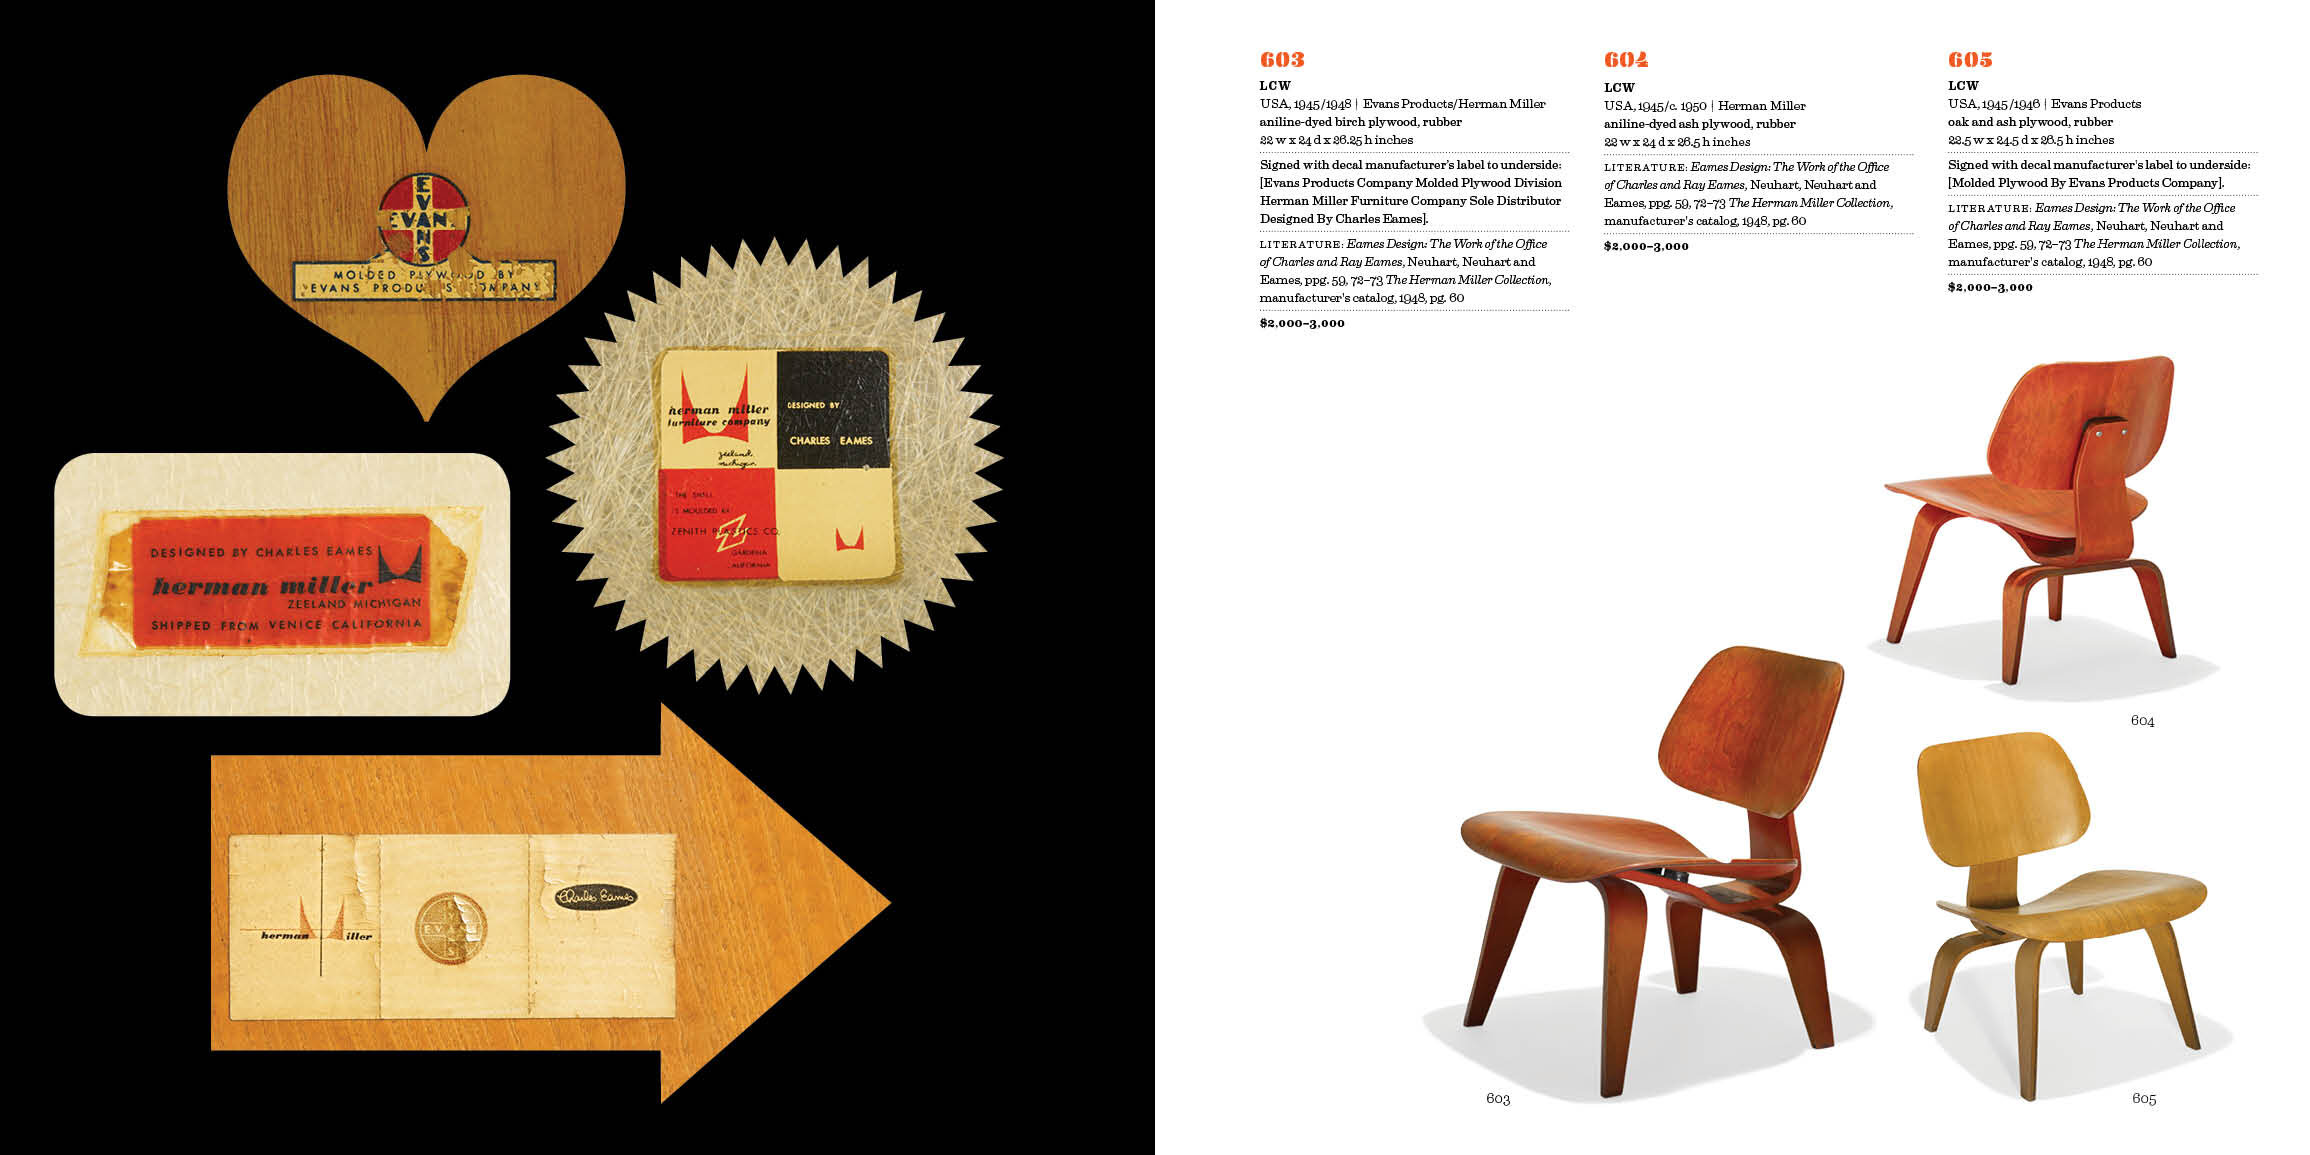 View or download the Eames Auction catalog. | Wright: Auctions of 